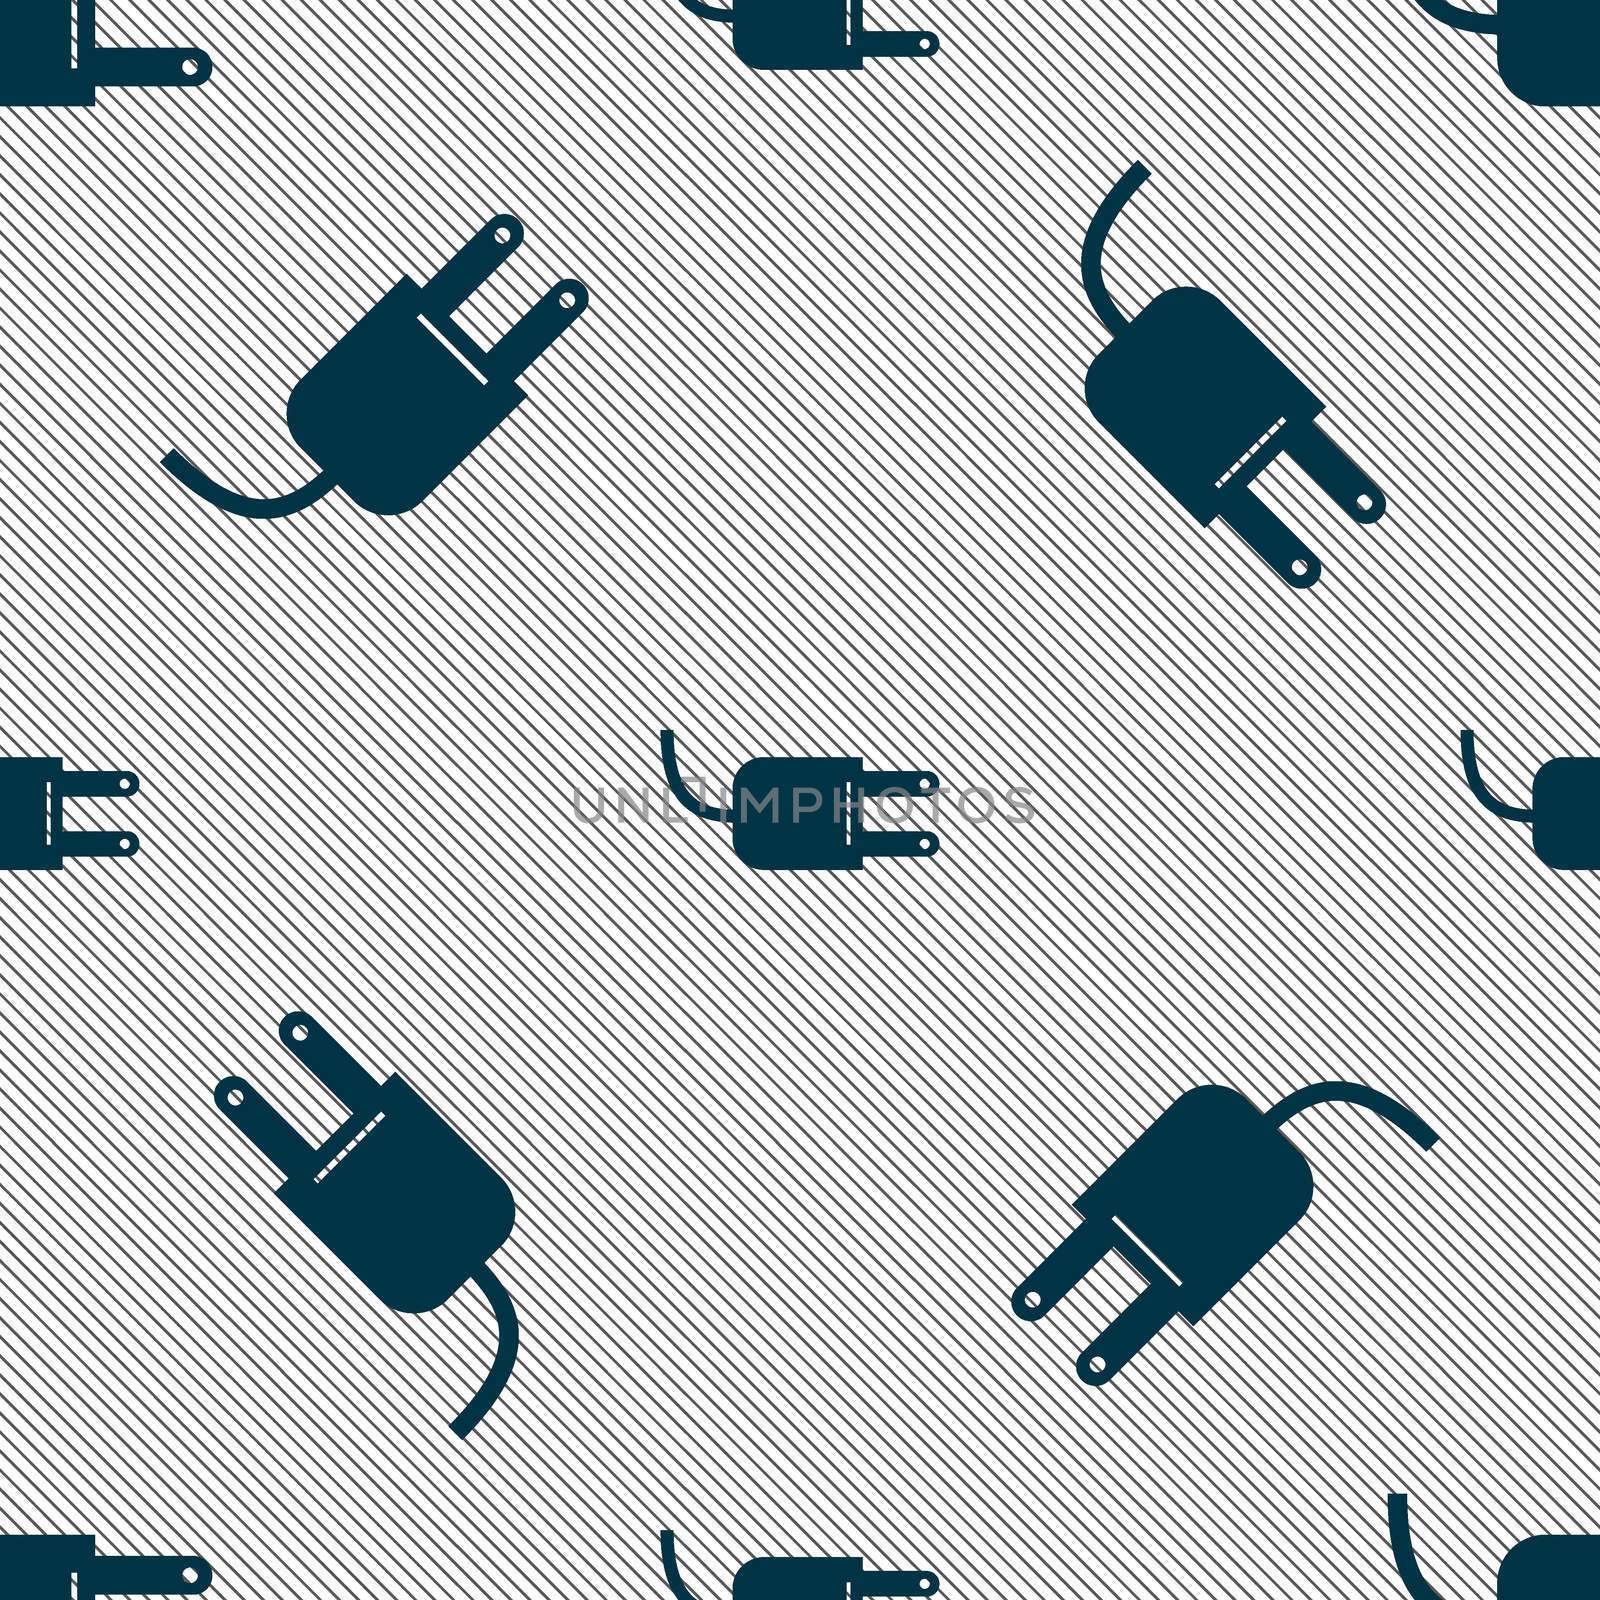 Electric plug sign icon. Power energy symbol. Seamless pattern with geometric texture. illustration